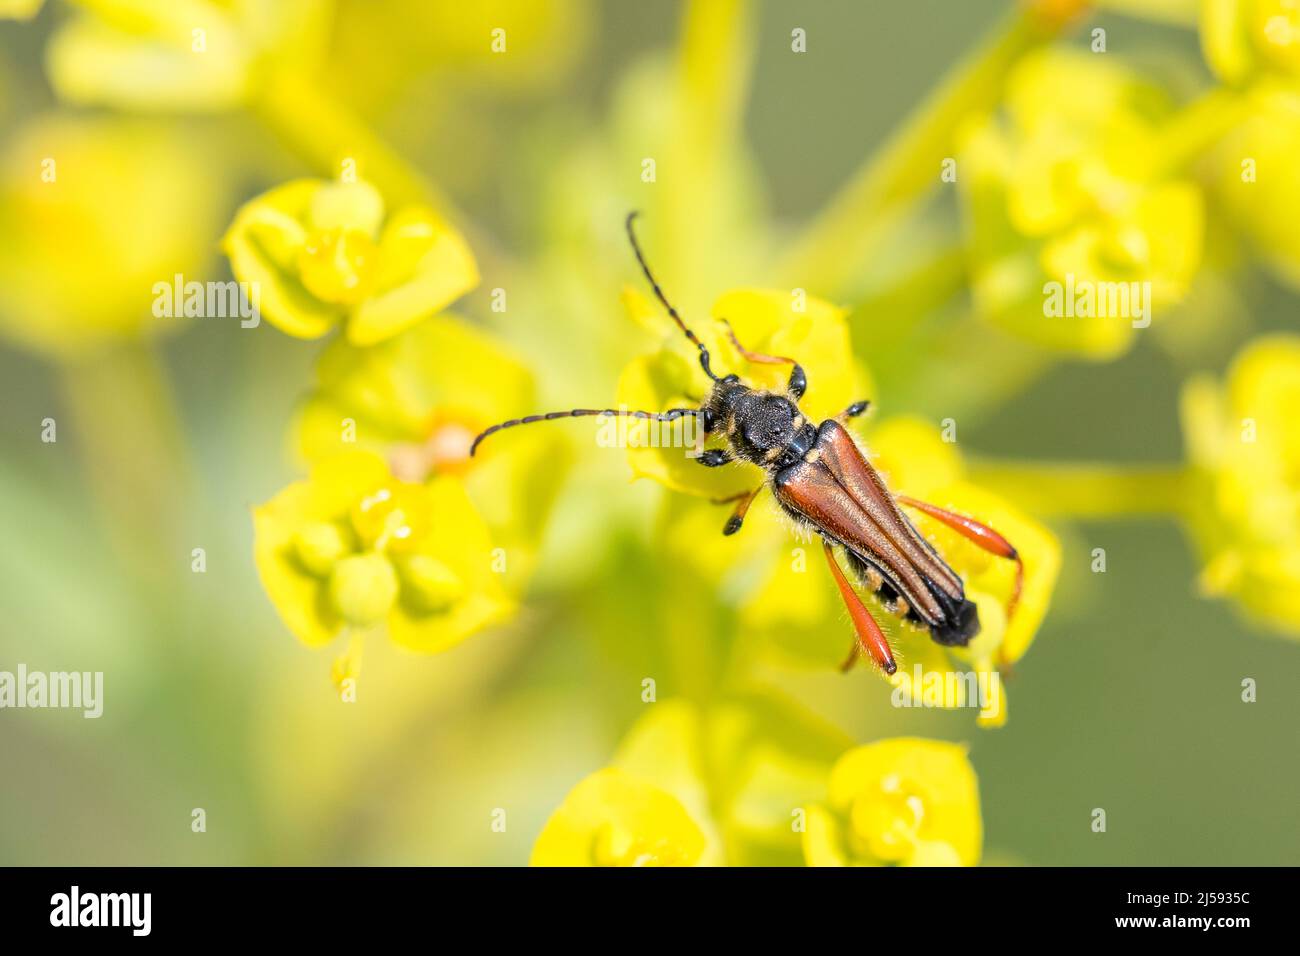 Stenopterus rufus is a beetle species of round-necked longhorns belonging to the family Cerambycidae, subfamily Cerambycinae. Stock Photo